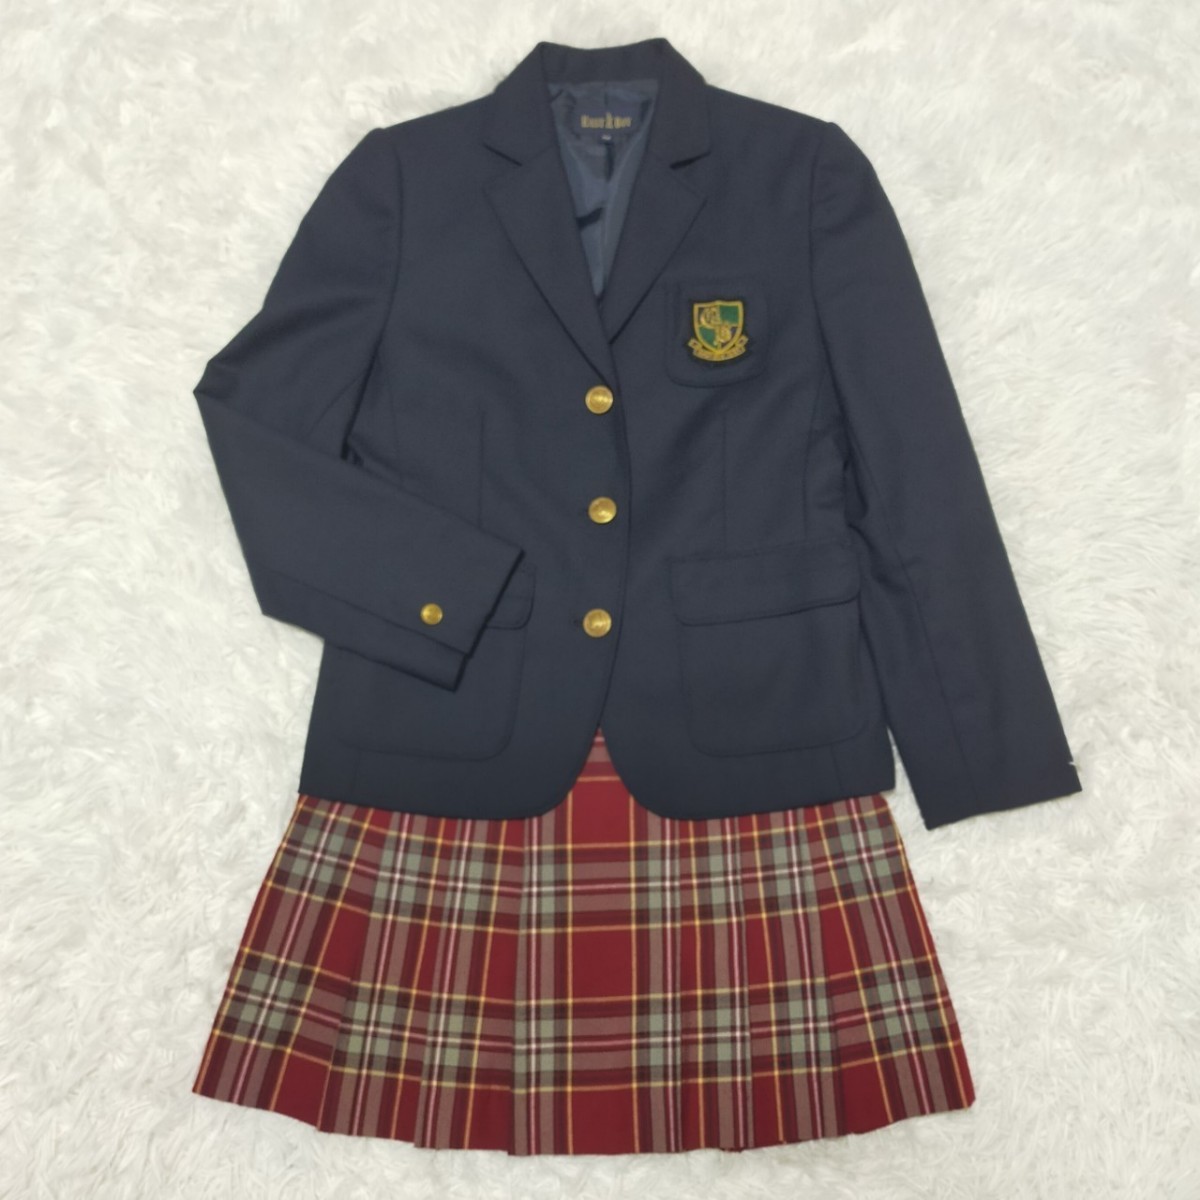 EASTBOY East Boy uniform . clothes hem. button lack of navy blue blur red check graduation ceremony go in . type Kids girl girl formal 